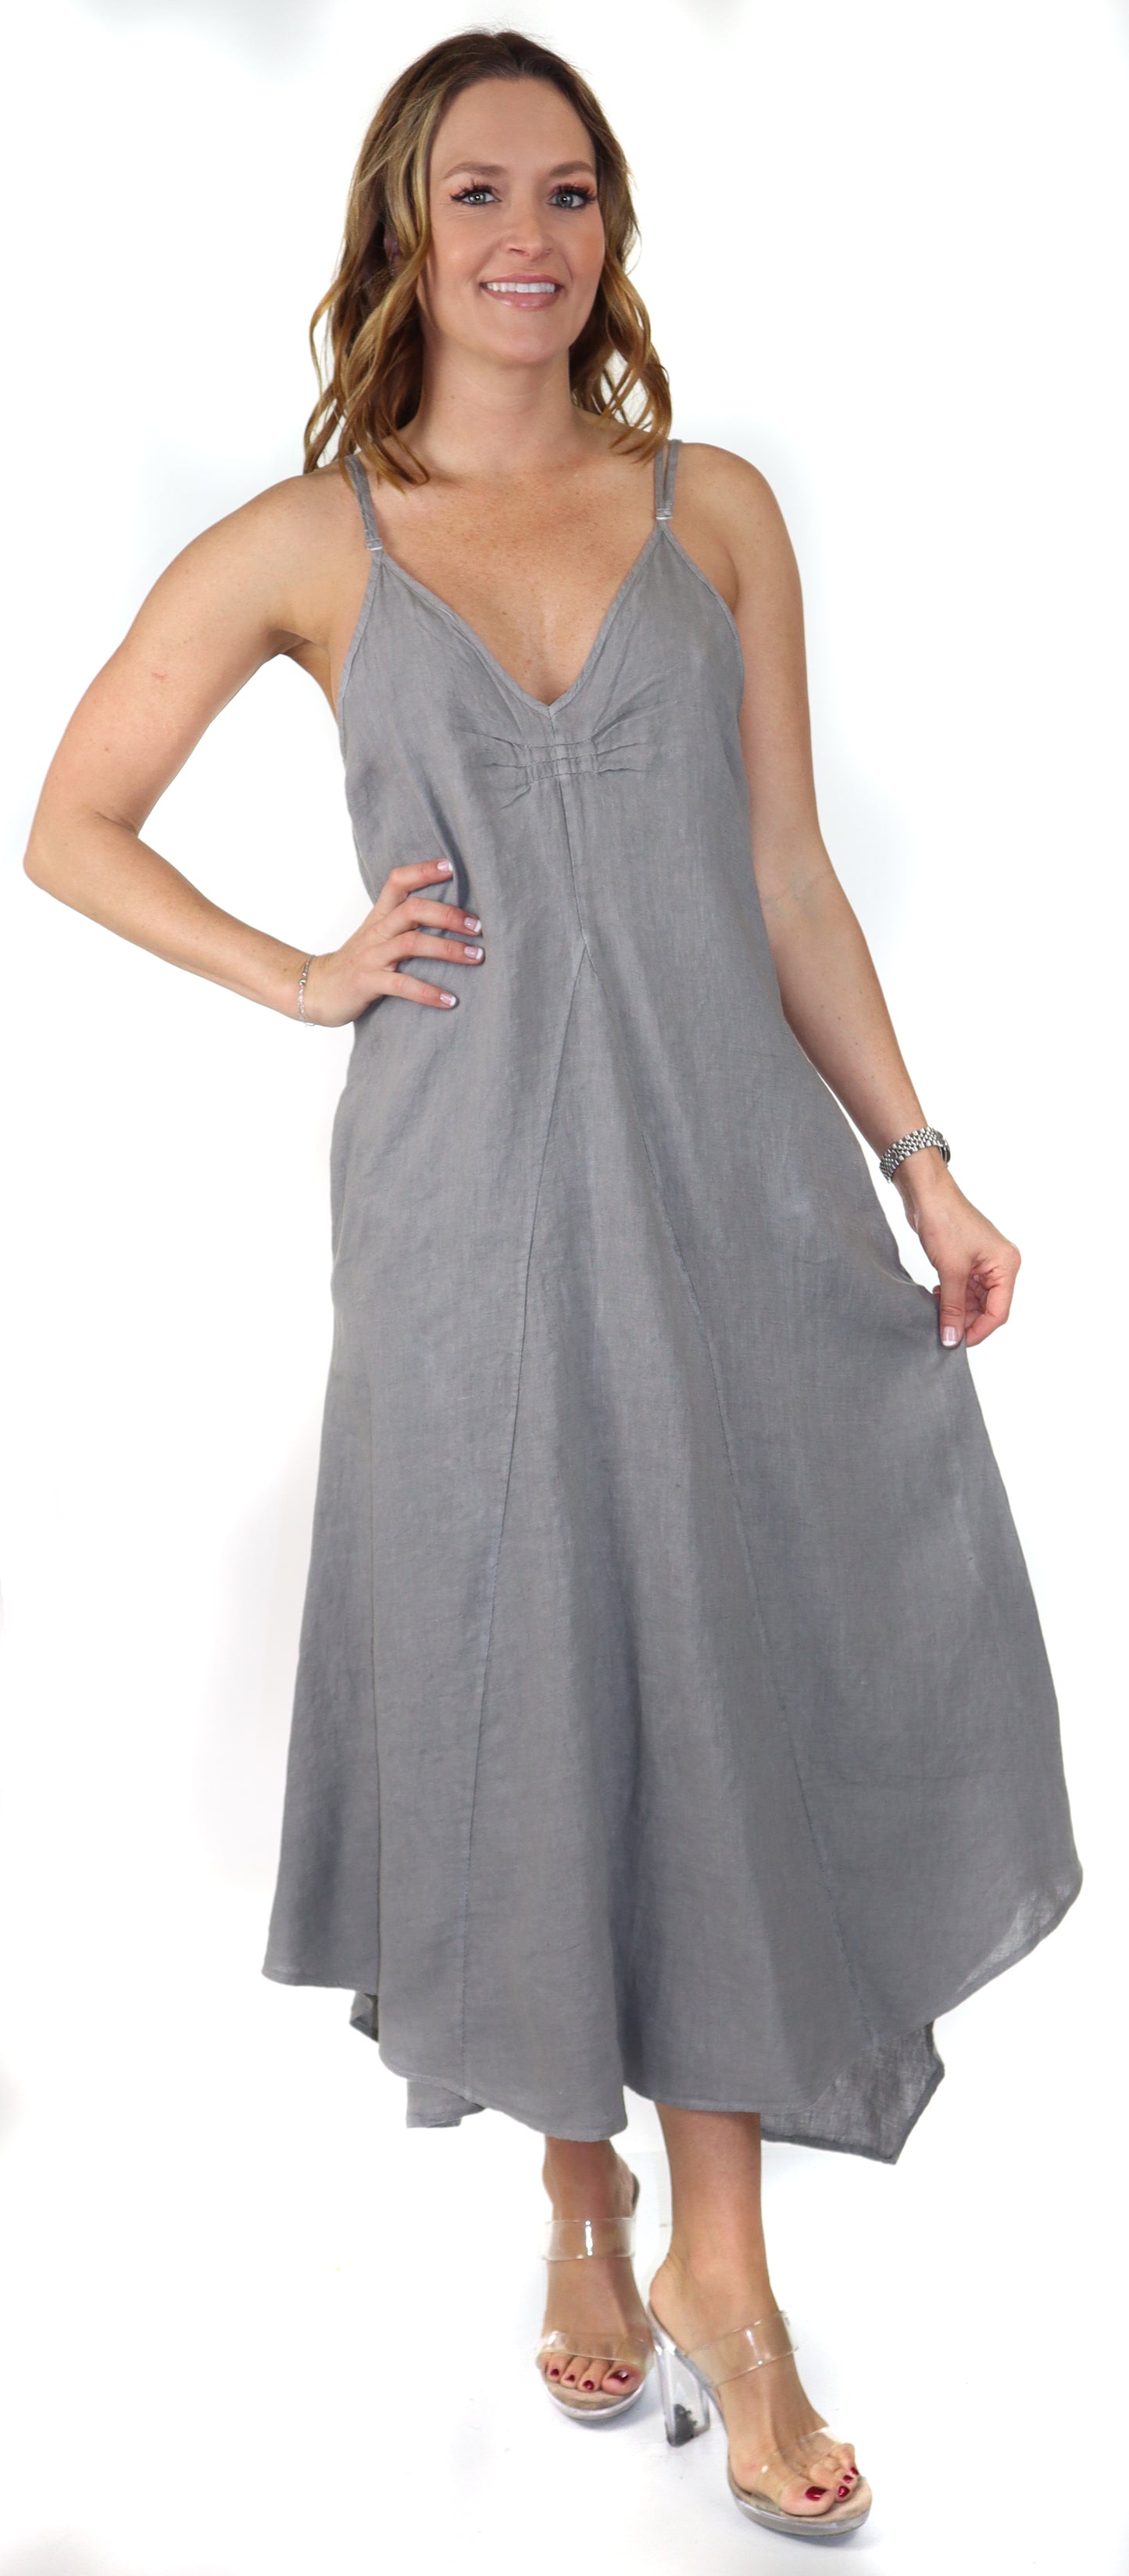 Women's Spaghetti Strap Maxi Dress with Deep Side Pockets, Made in Italy, 100% linen Spaghetti Strap Maxi Dress with Deep Side Pockets, Made in Italy